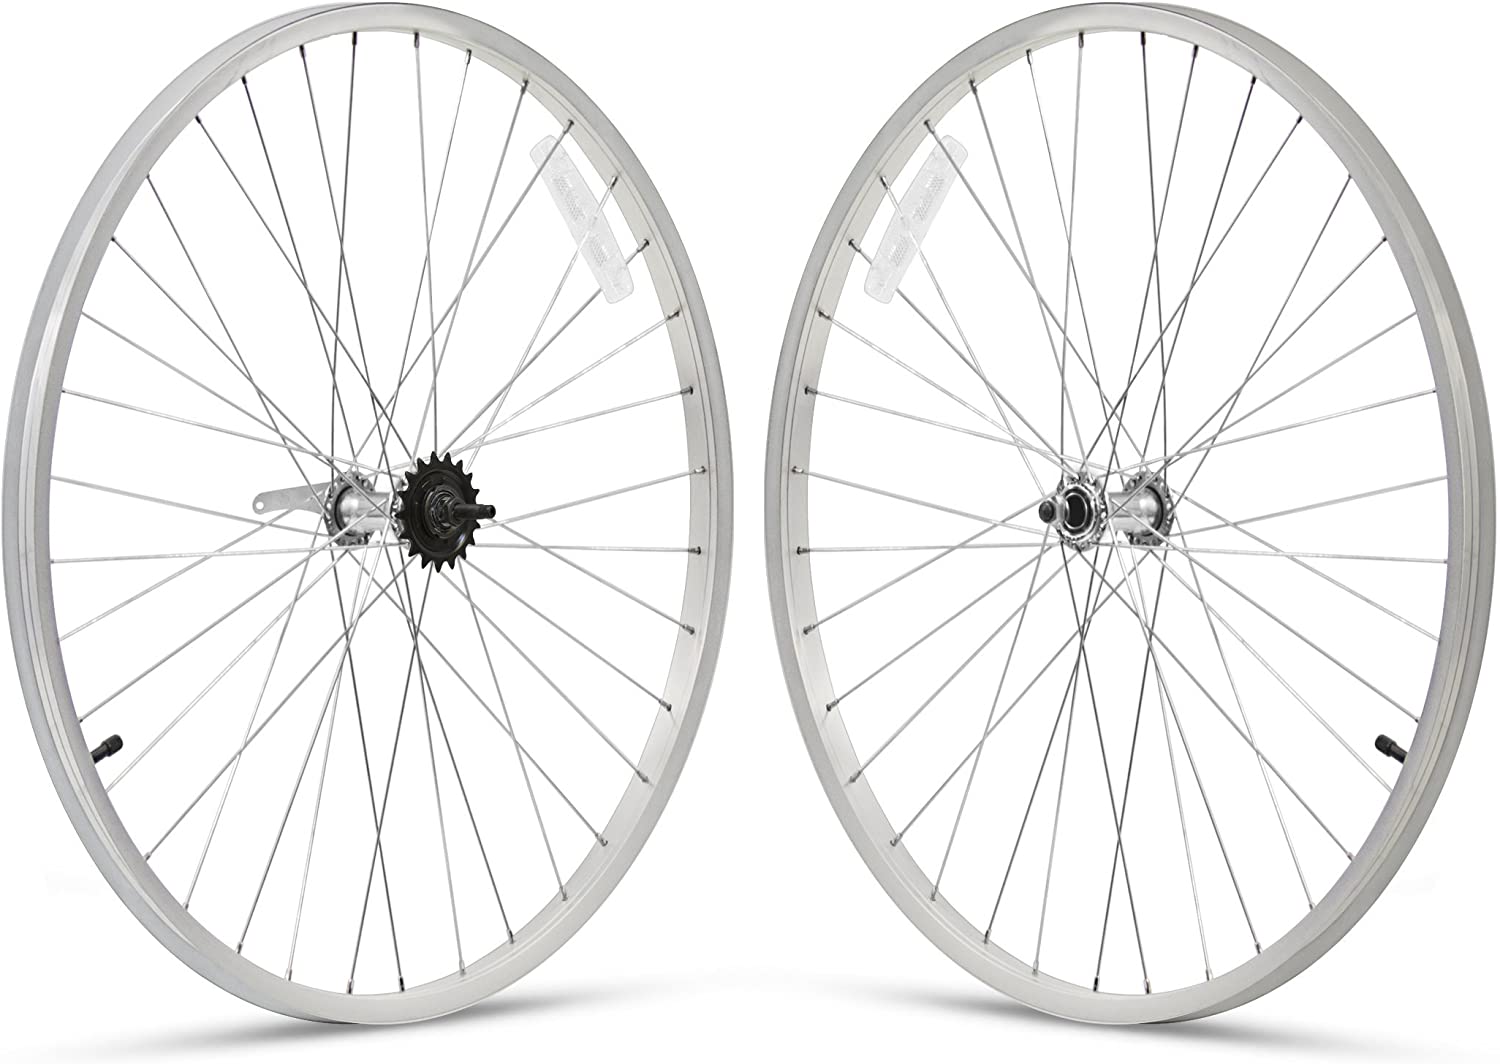 Firmstrong Beach Cruiser Bicycle Wheelset, Front and Rear